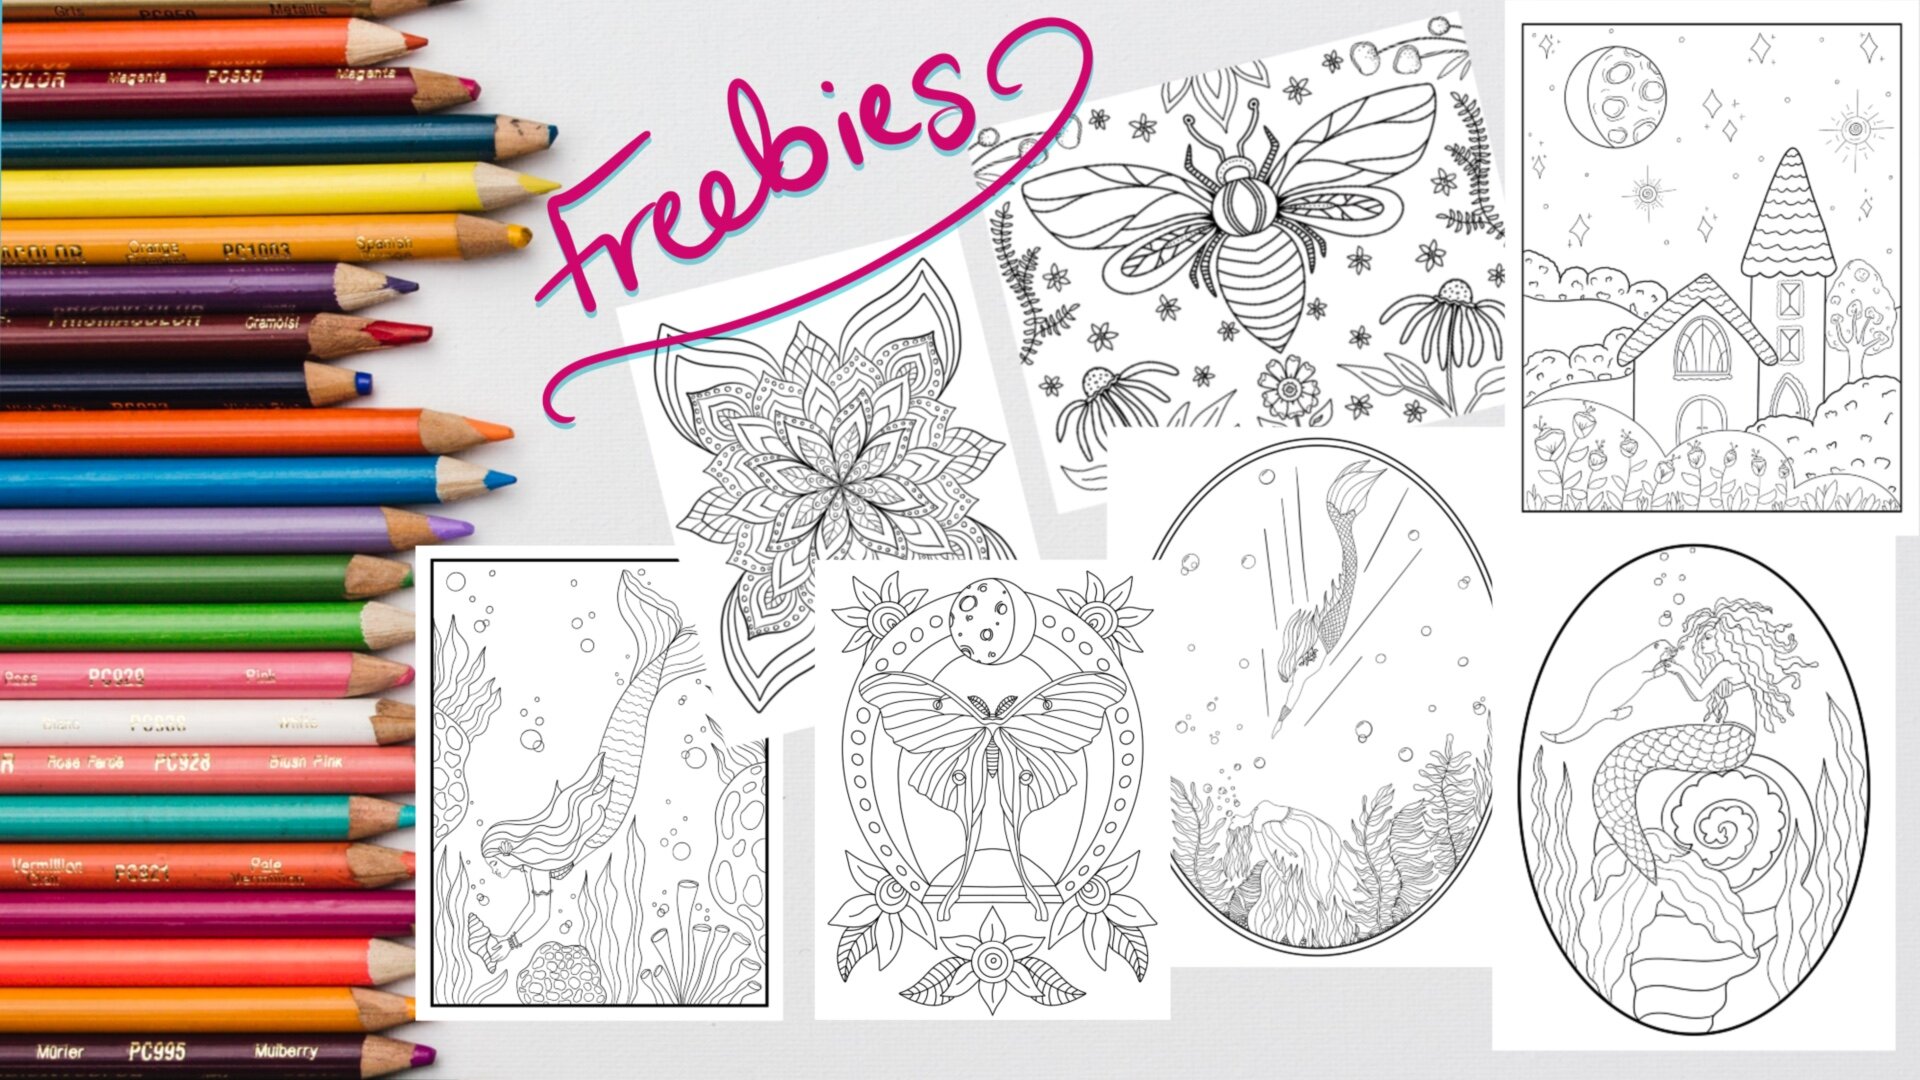 Procreate Coloring Pages And How to Color Digitally On Your iPad ...